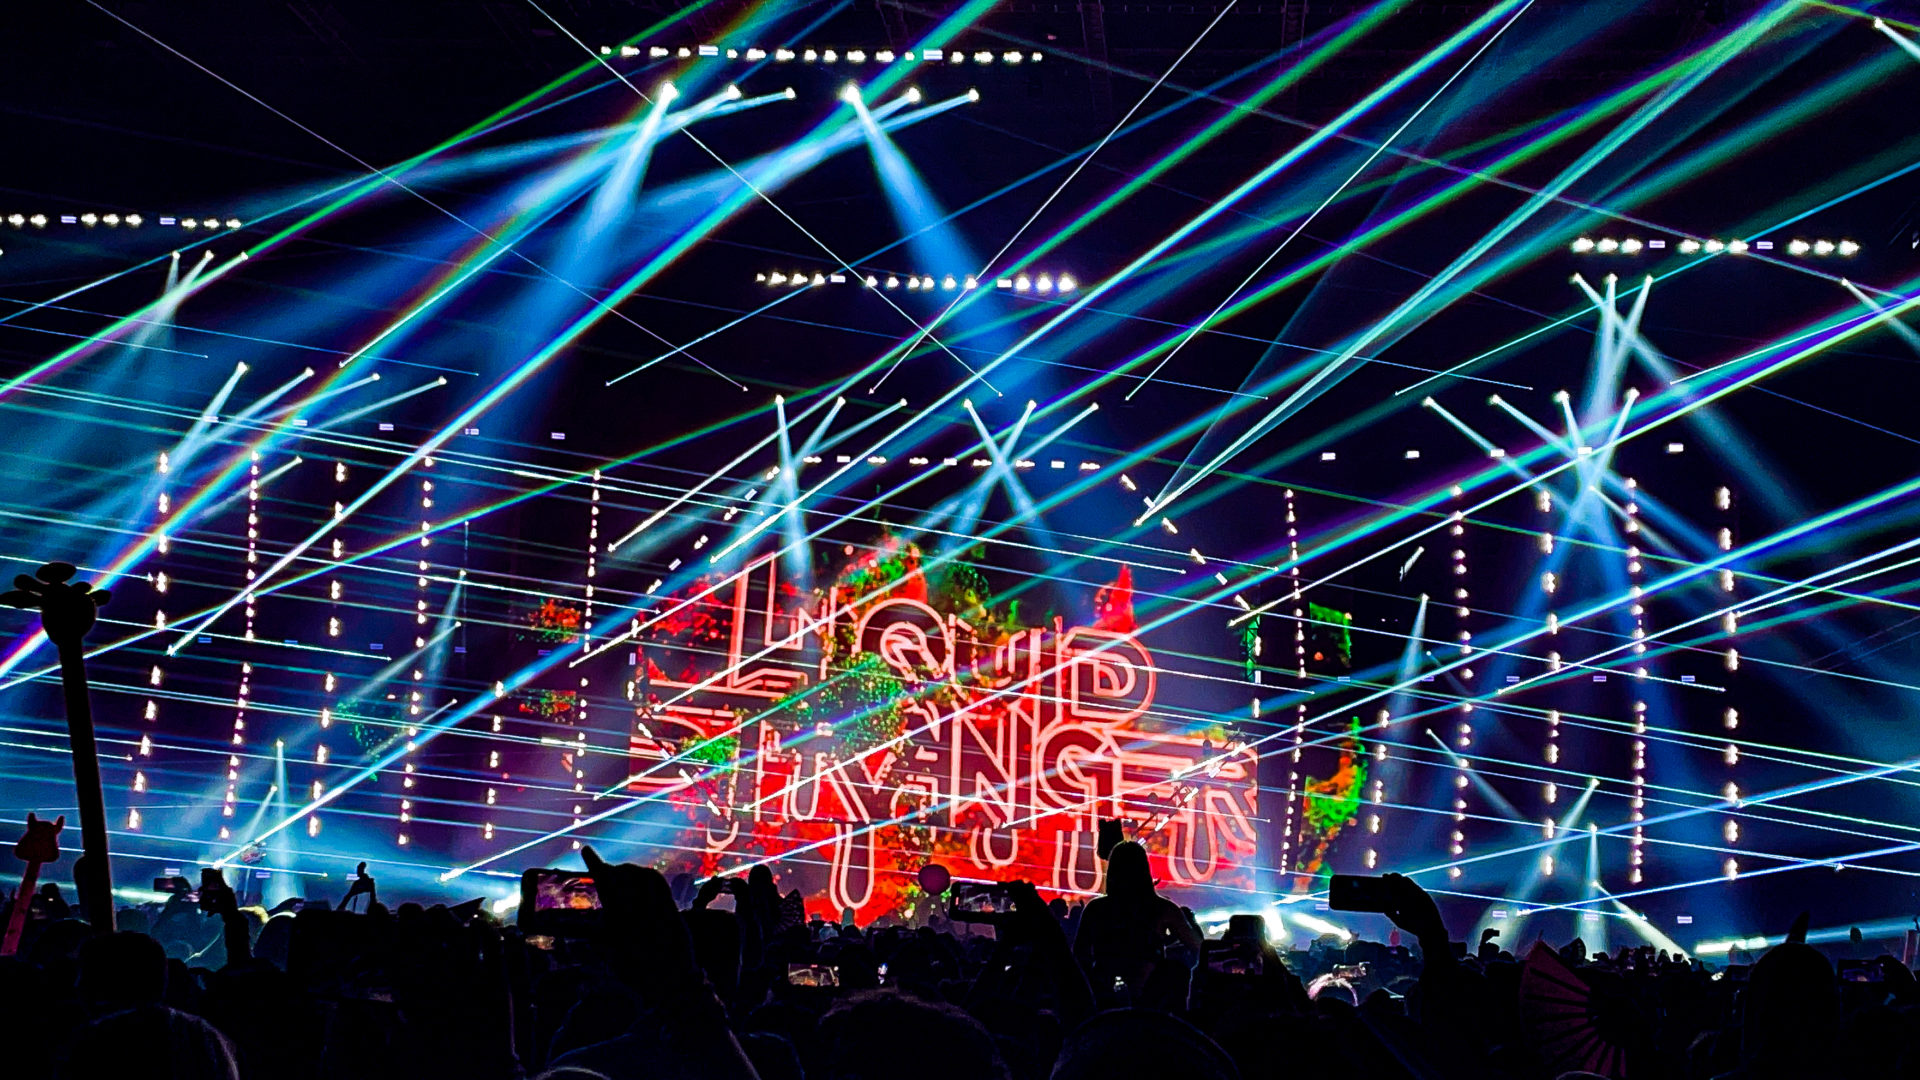 Excision's Thunderdome 2023 main stage with blue, green, and white lasers shining during Liquid Stranger's set